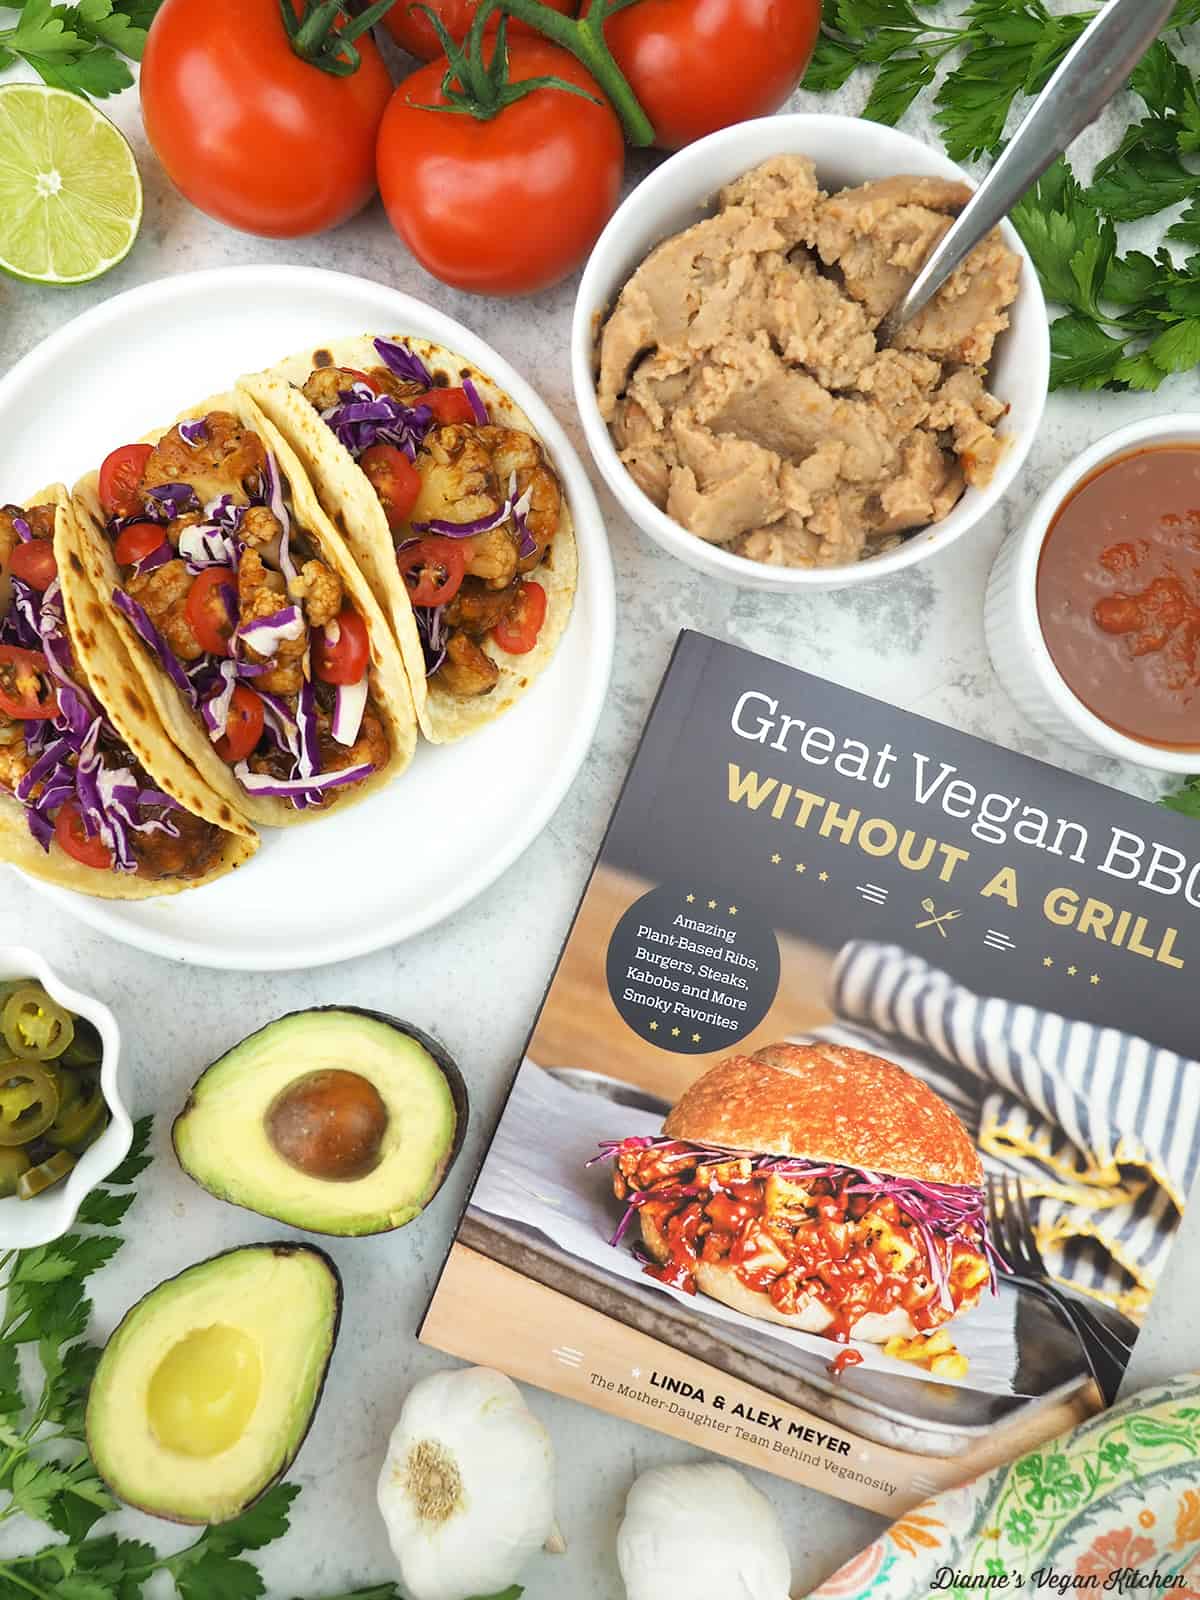 BBQ Cauliflower Tacos with Great Vegan BBQ Without a Grill